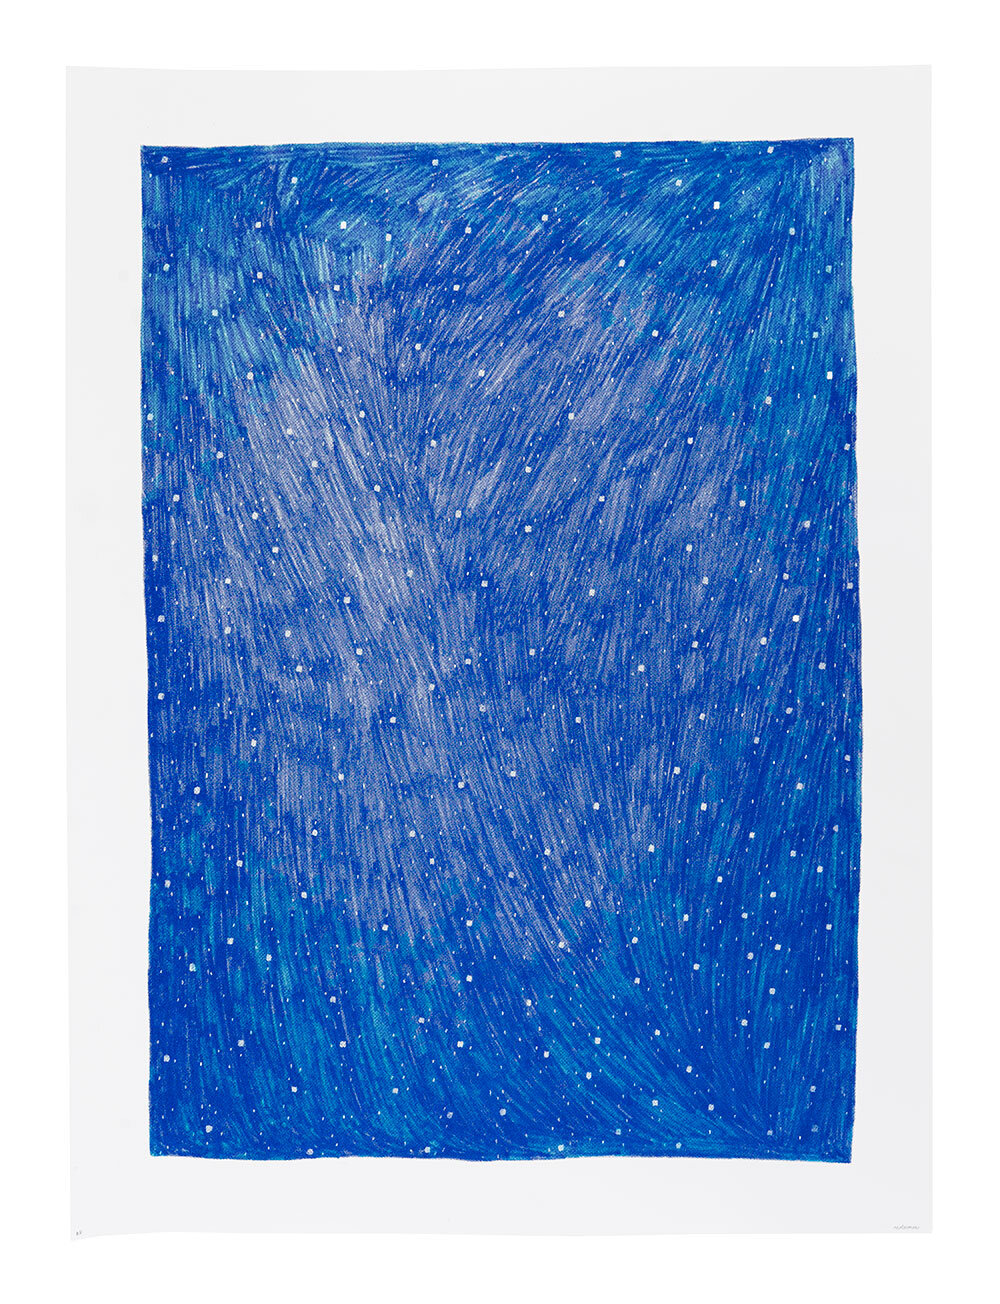   Blue Stars   Exclusive Print edition with Picture Room one color silkscreen on paper, 30 x 22 in., edition of 16, 2014    